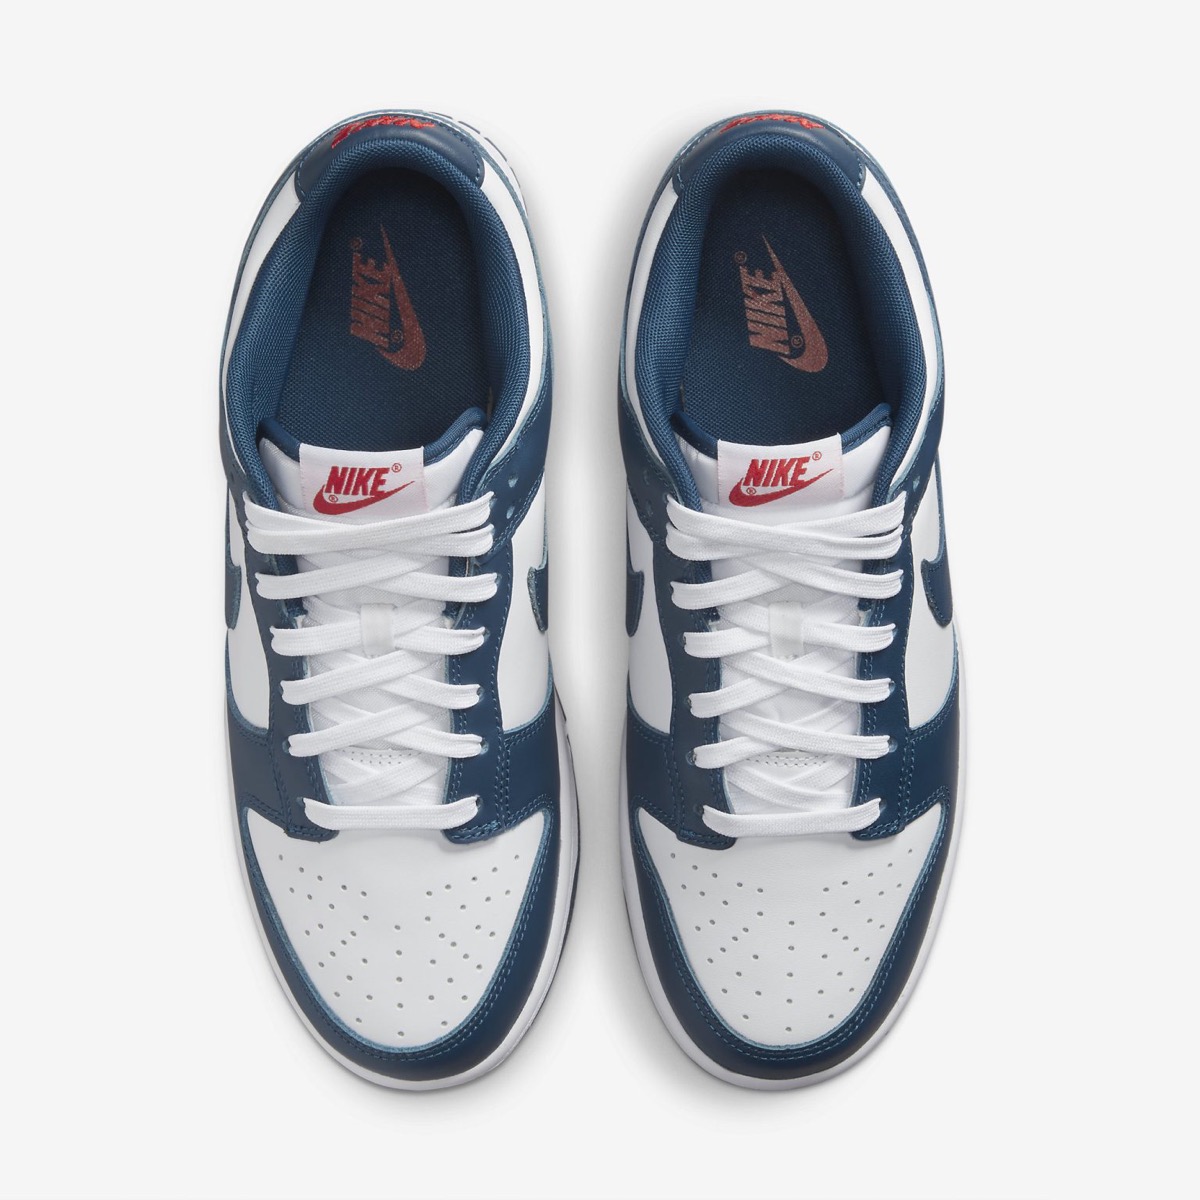 Nike Dunk Low Retro “Valerian Blue”が国内6月30日に再販予定 | UP TO 